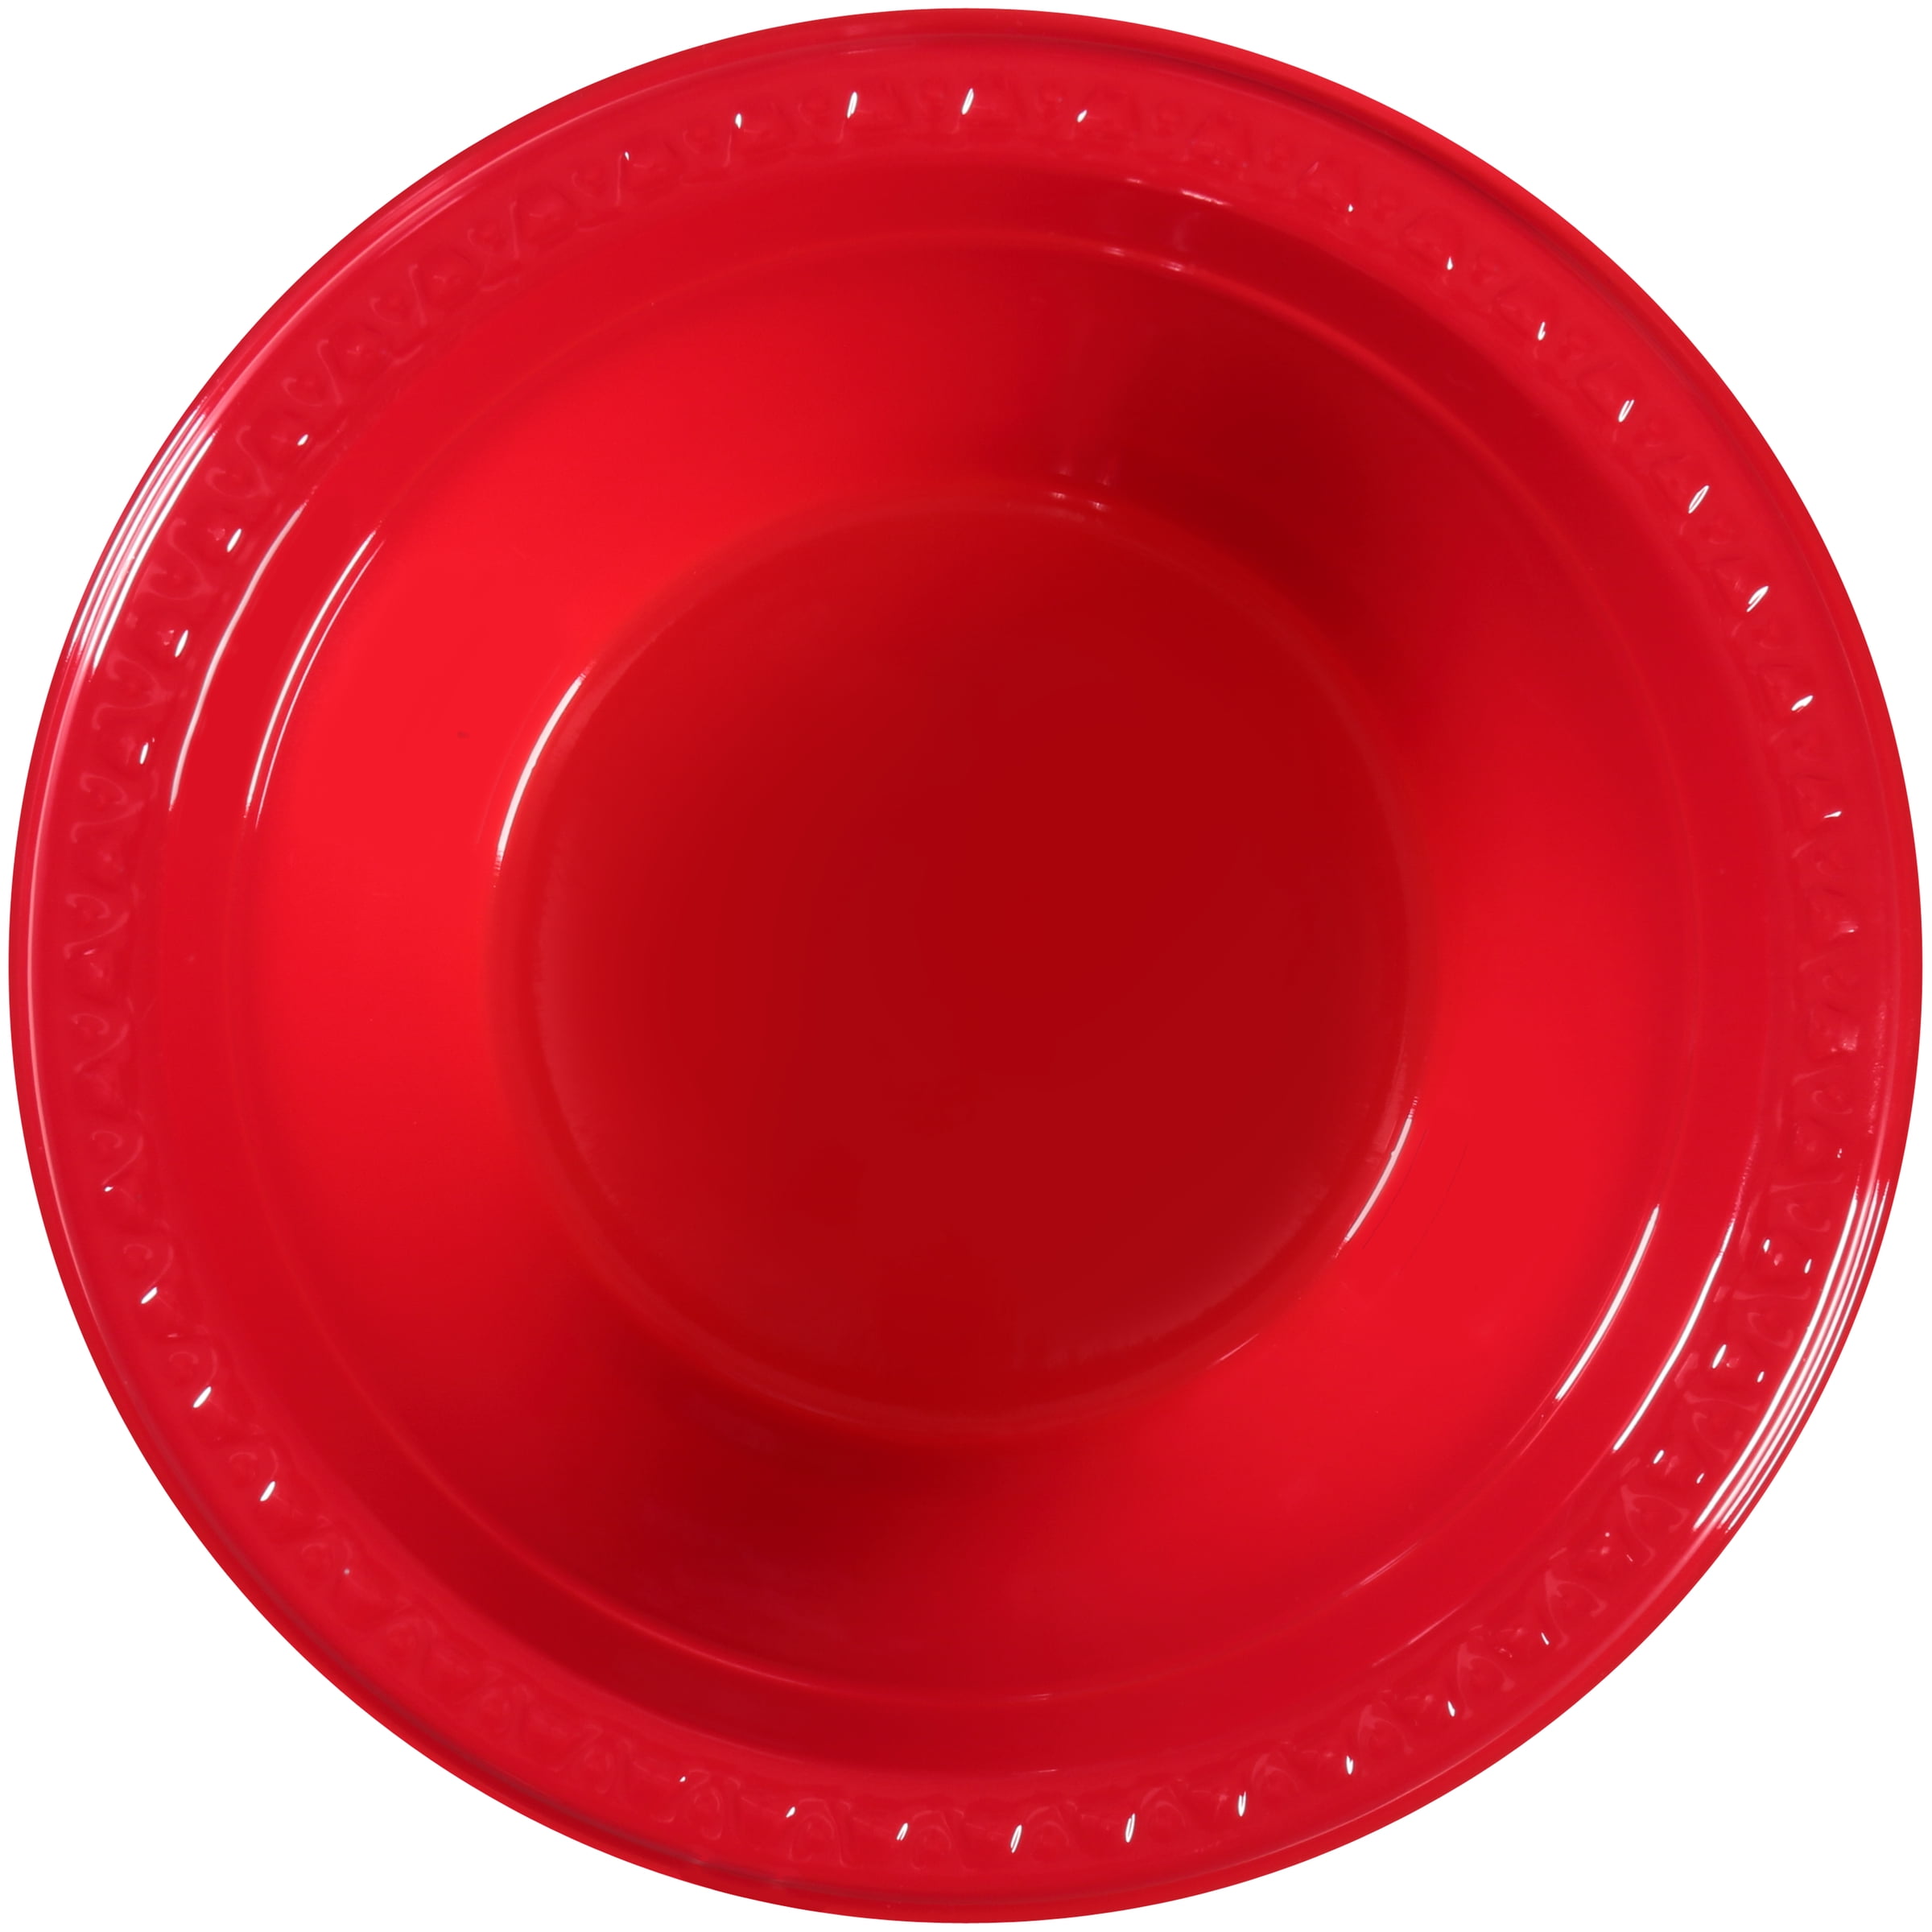 Solo Disposable Plastic Bowls, Red, 20 oz, 22 count ( 2 pack) New